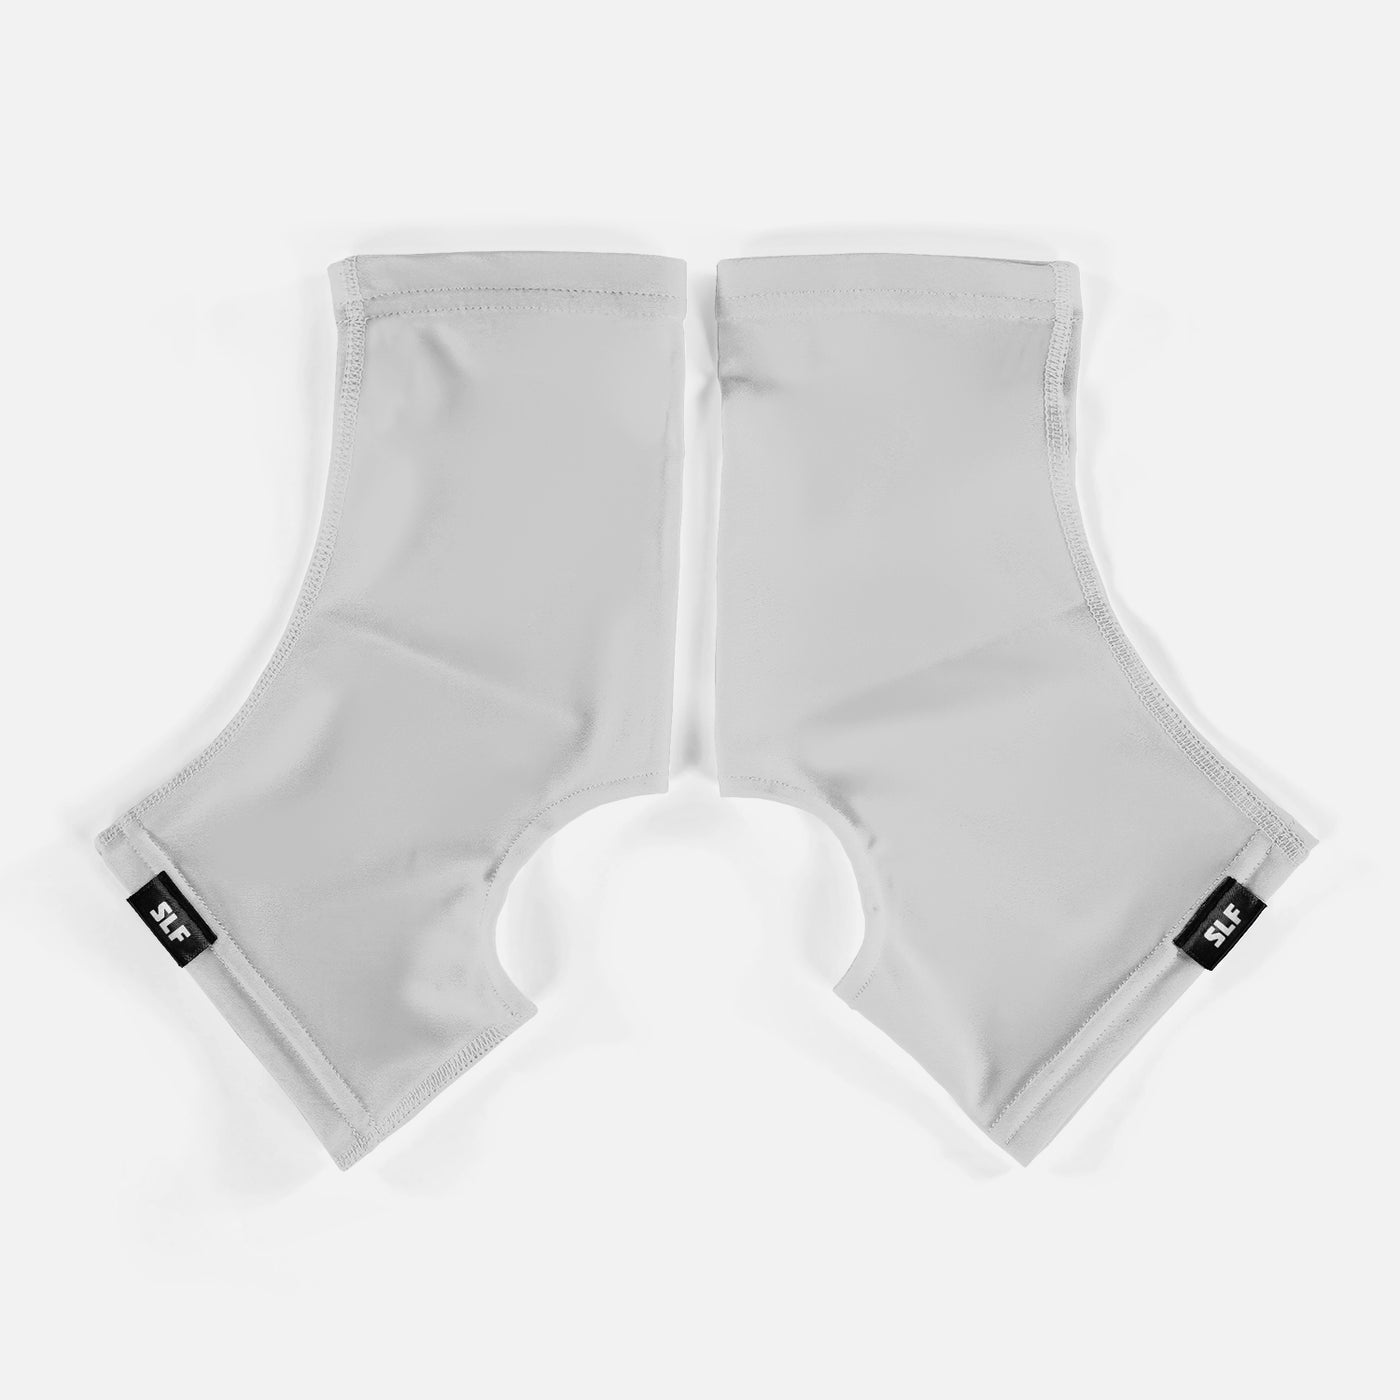 Hue Light Gray Spats / Cleat Covers - Big